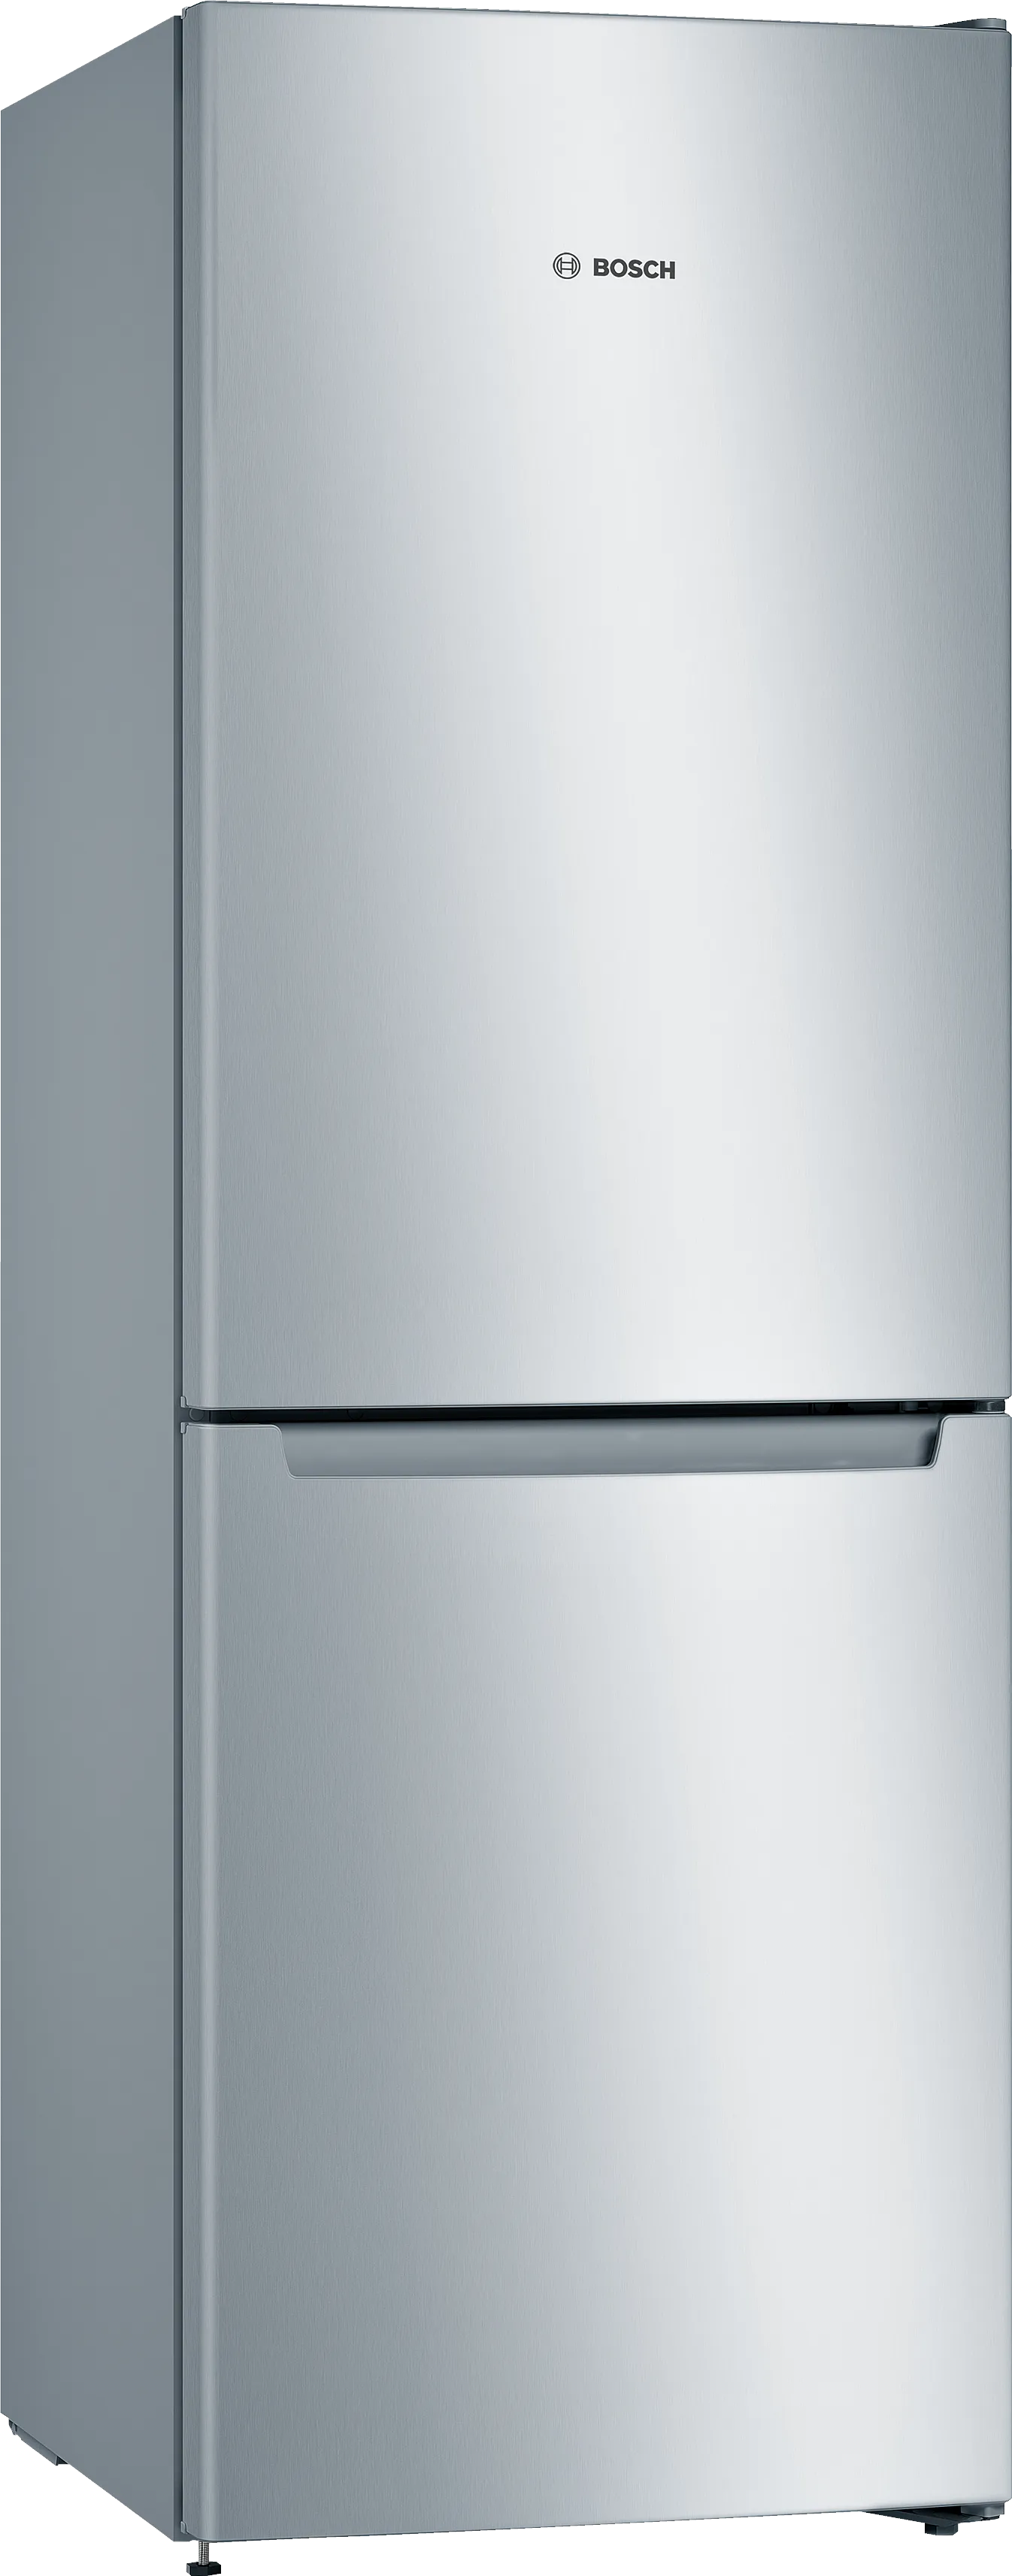 Series 2 Free-standing fridge-freezer with freezer at bottom 176 x 60 cm Stainless steel look 